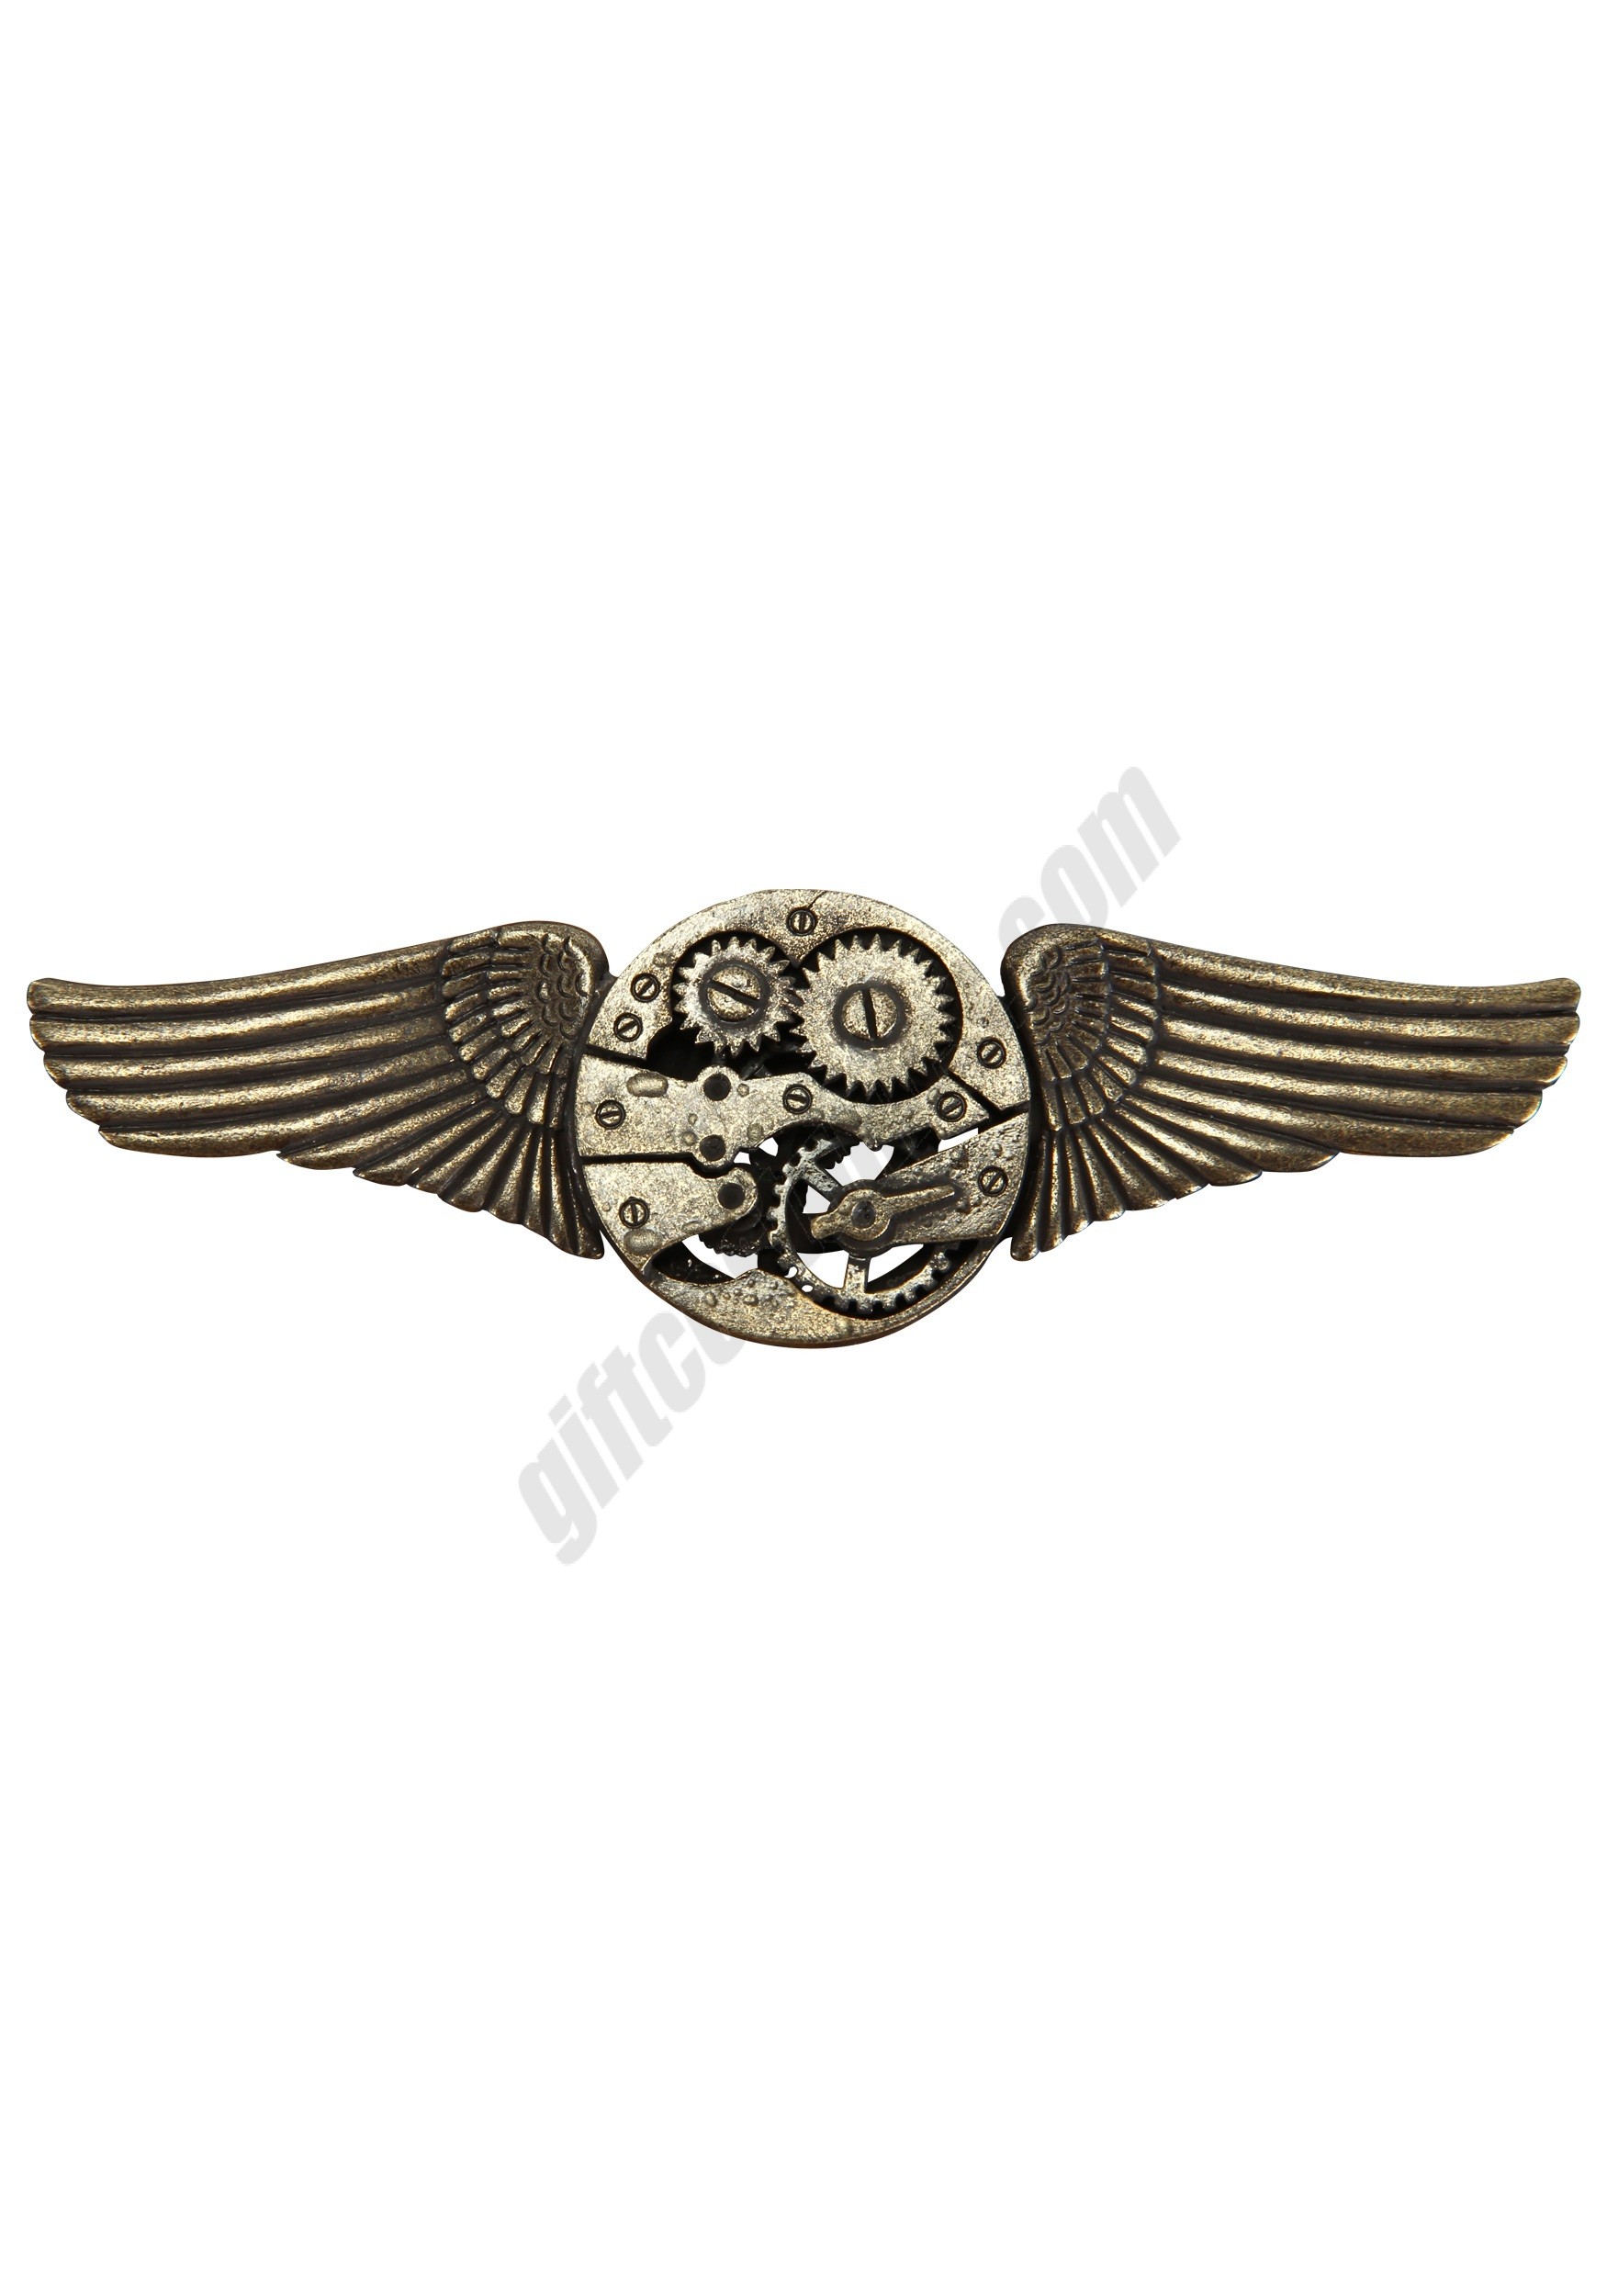 Antique Gear Wing Pin Promotions - Antique Gear Wing Pin Promotions